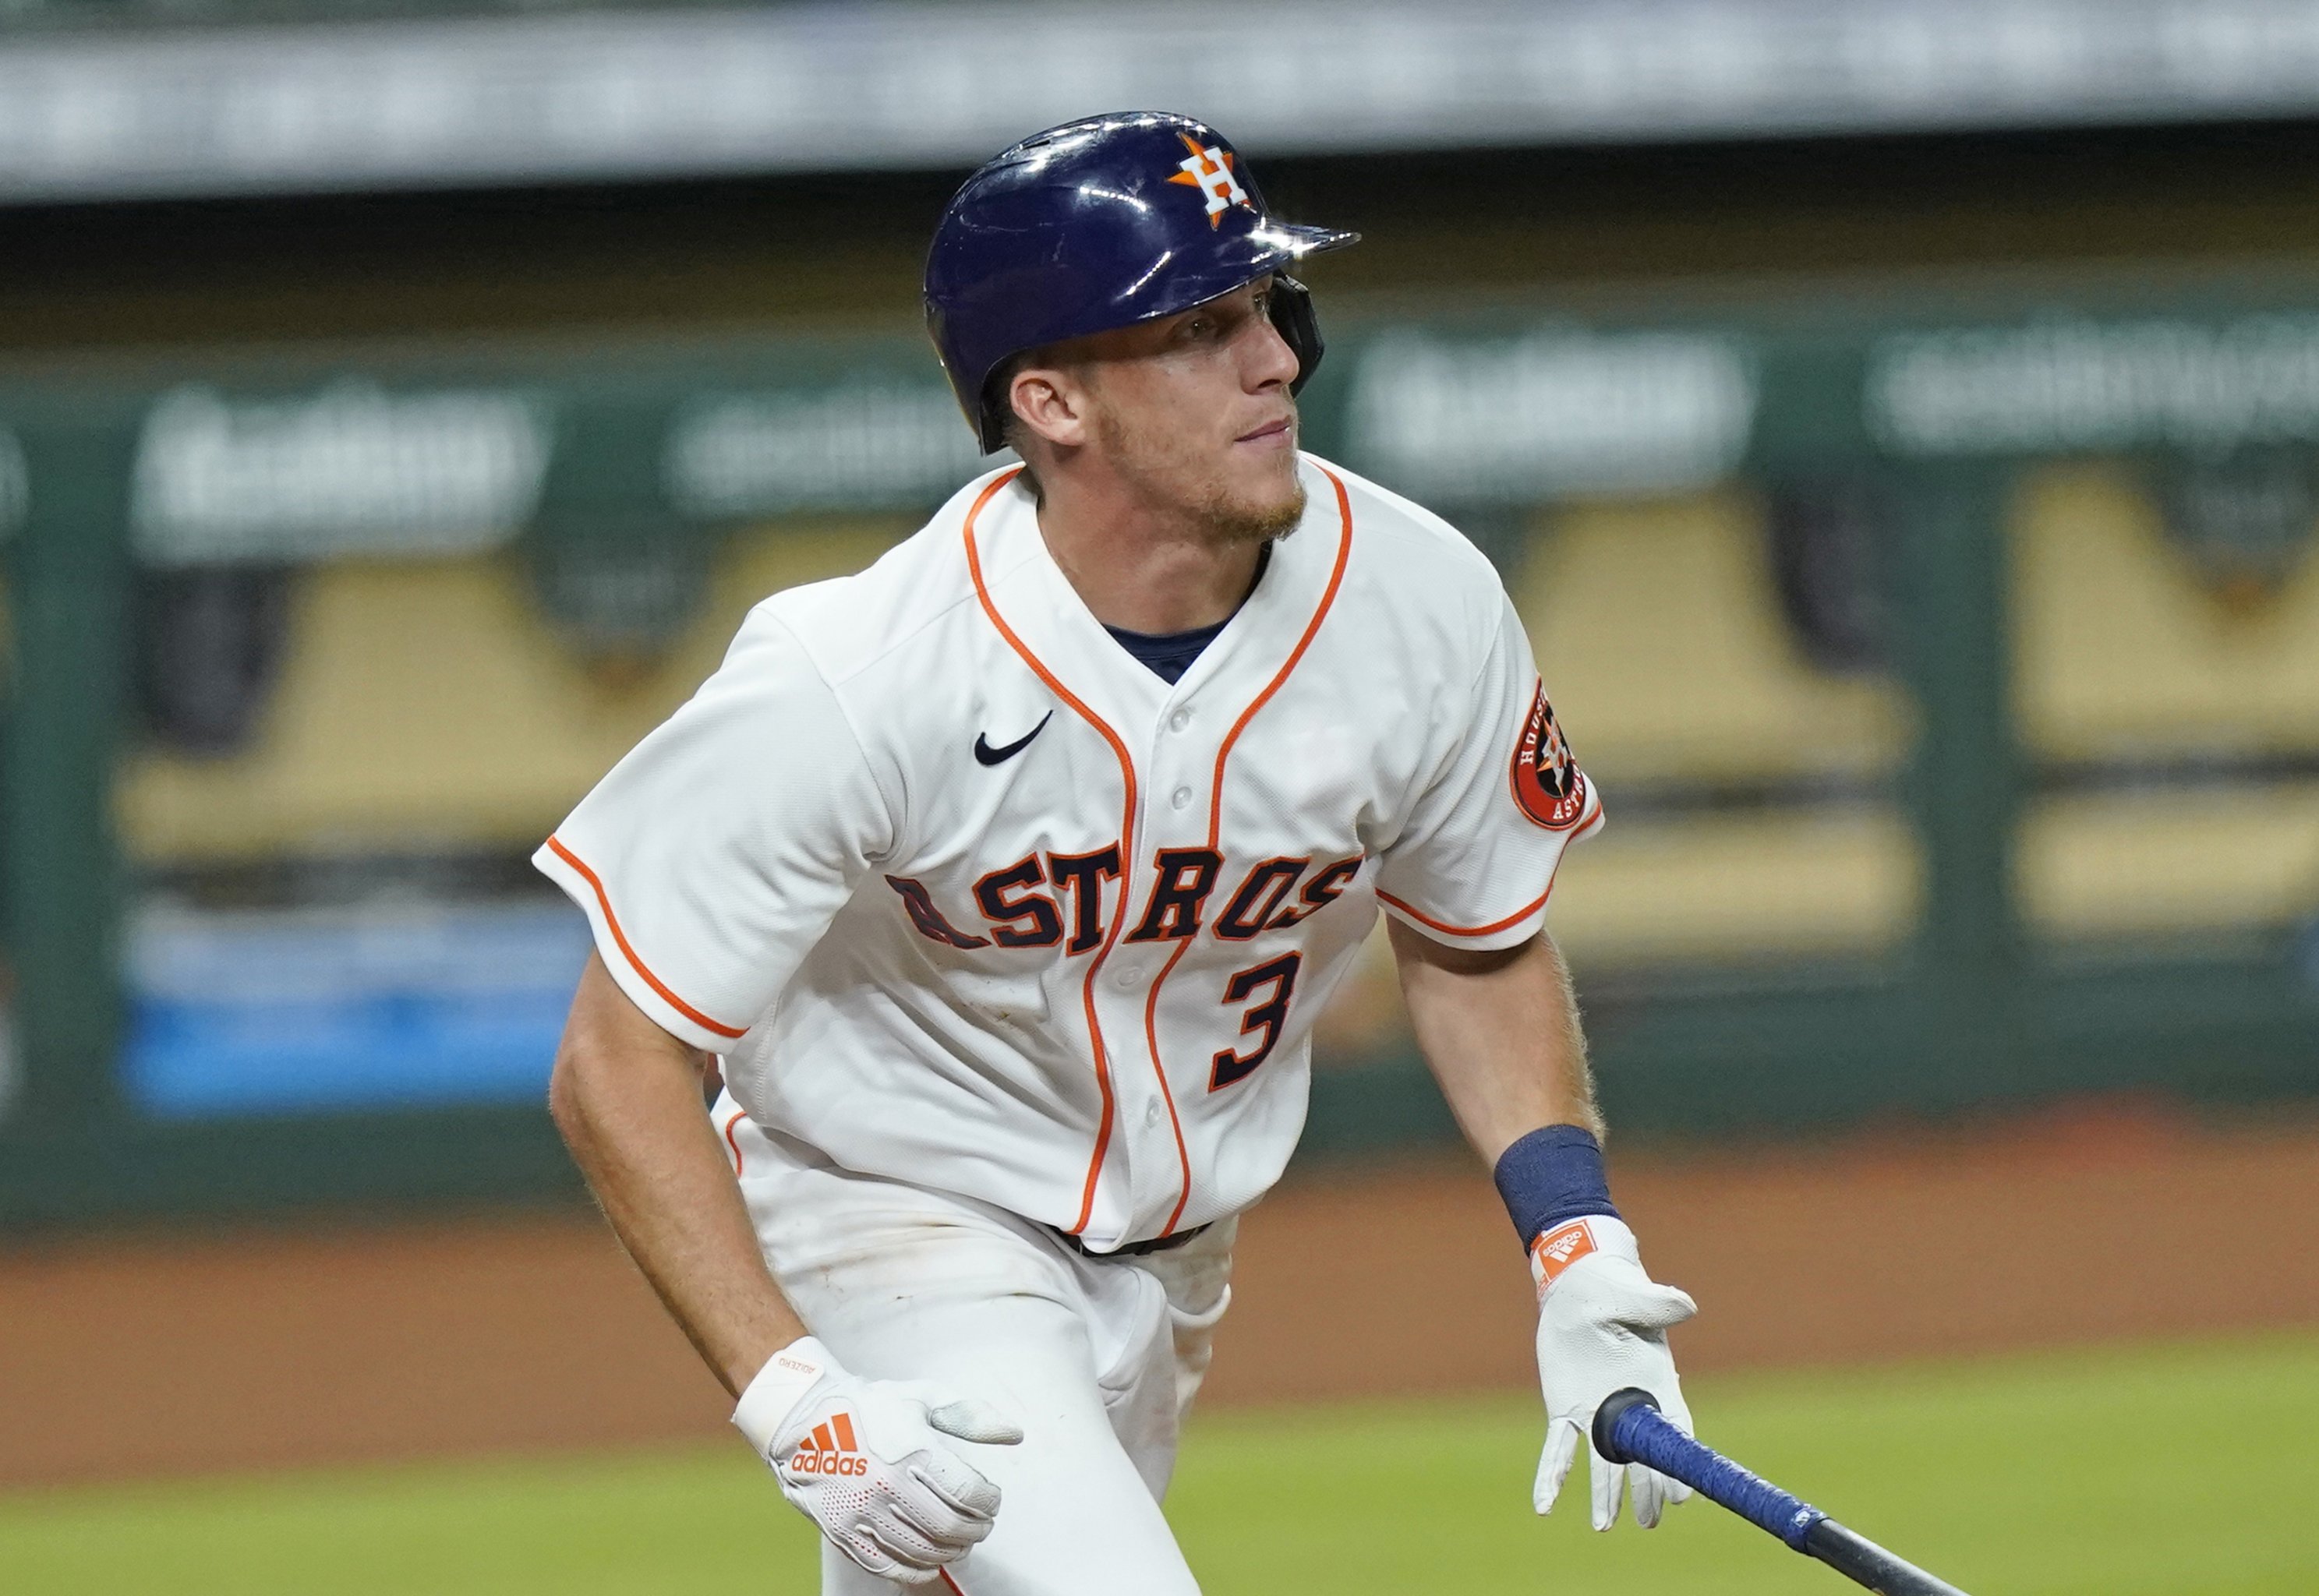 Astros: Myles Straw most likely to have a breakout season